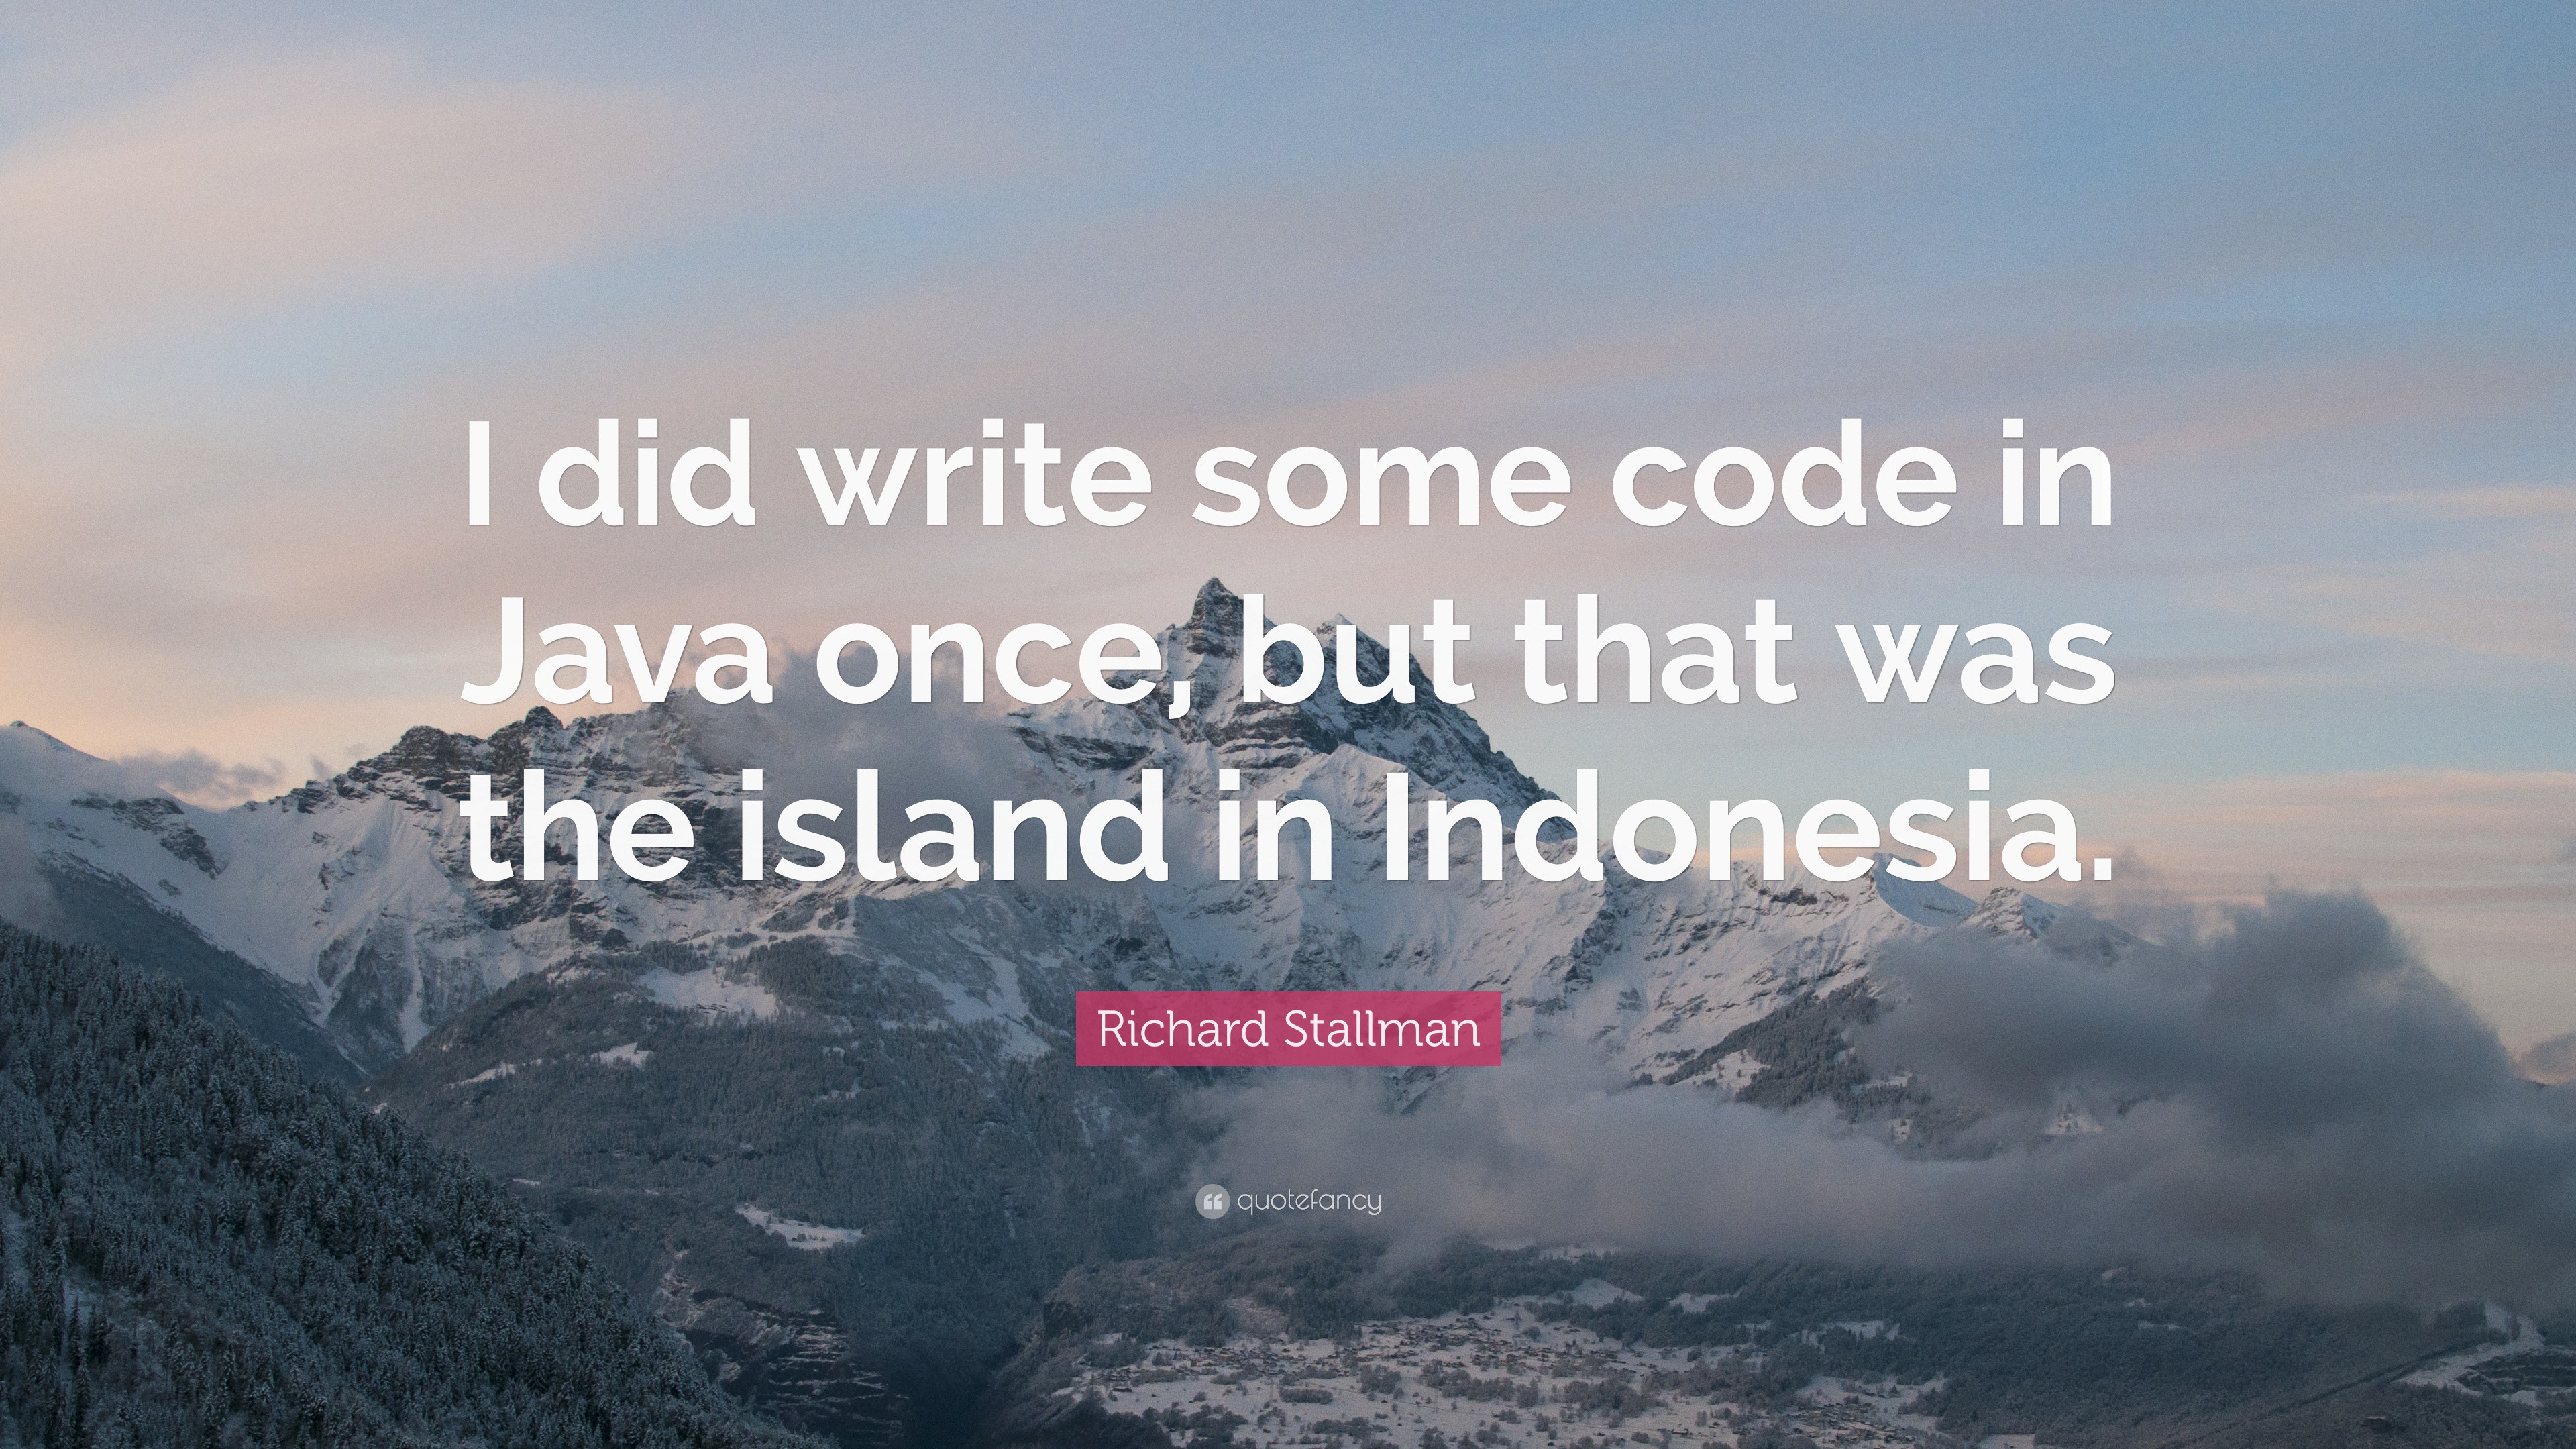 Richard Stallman Quote: “I did write some code in Java once, but that